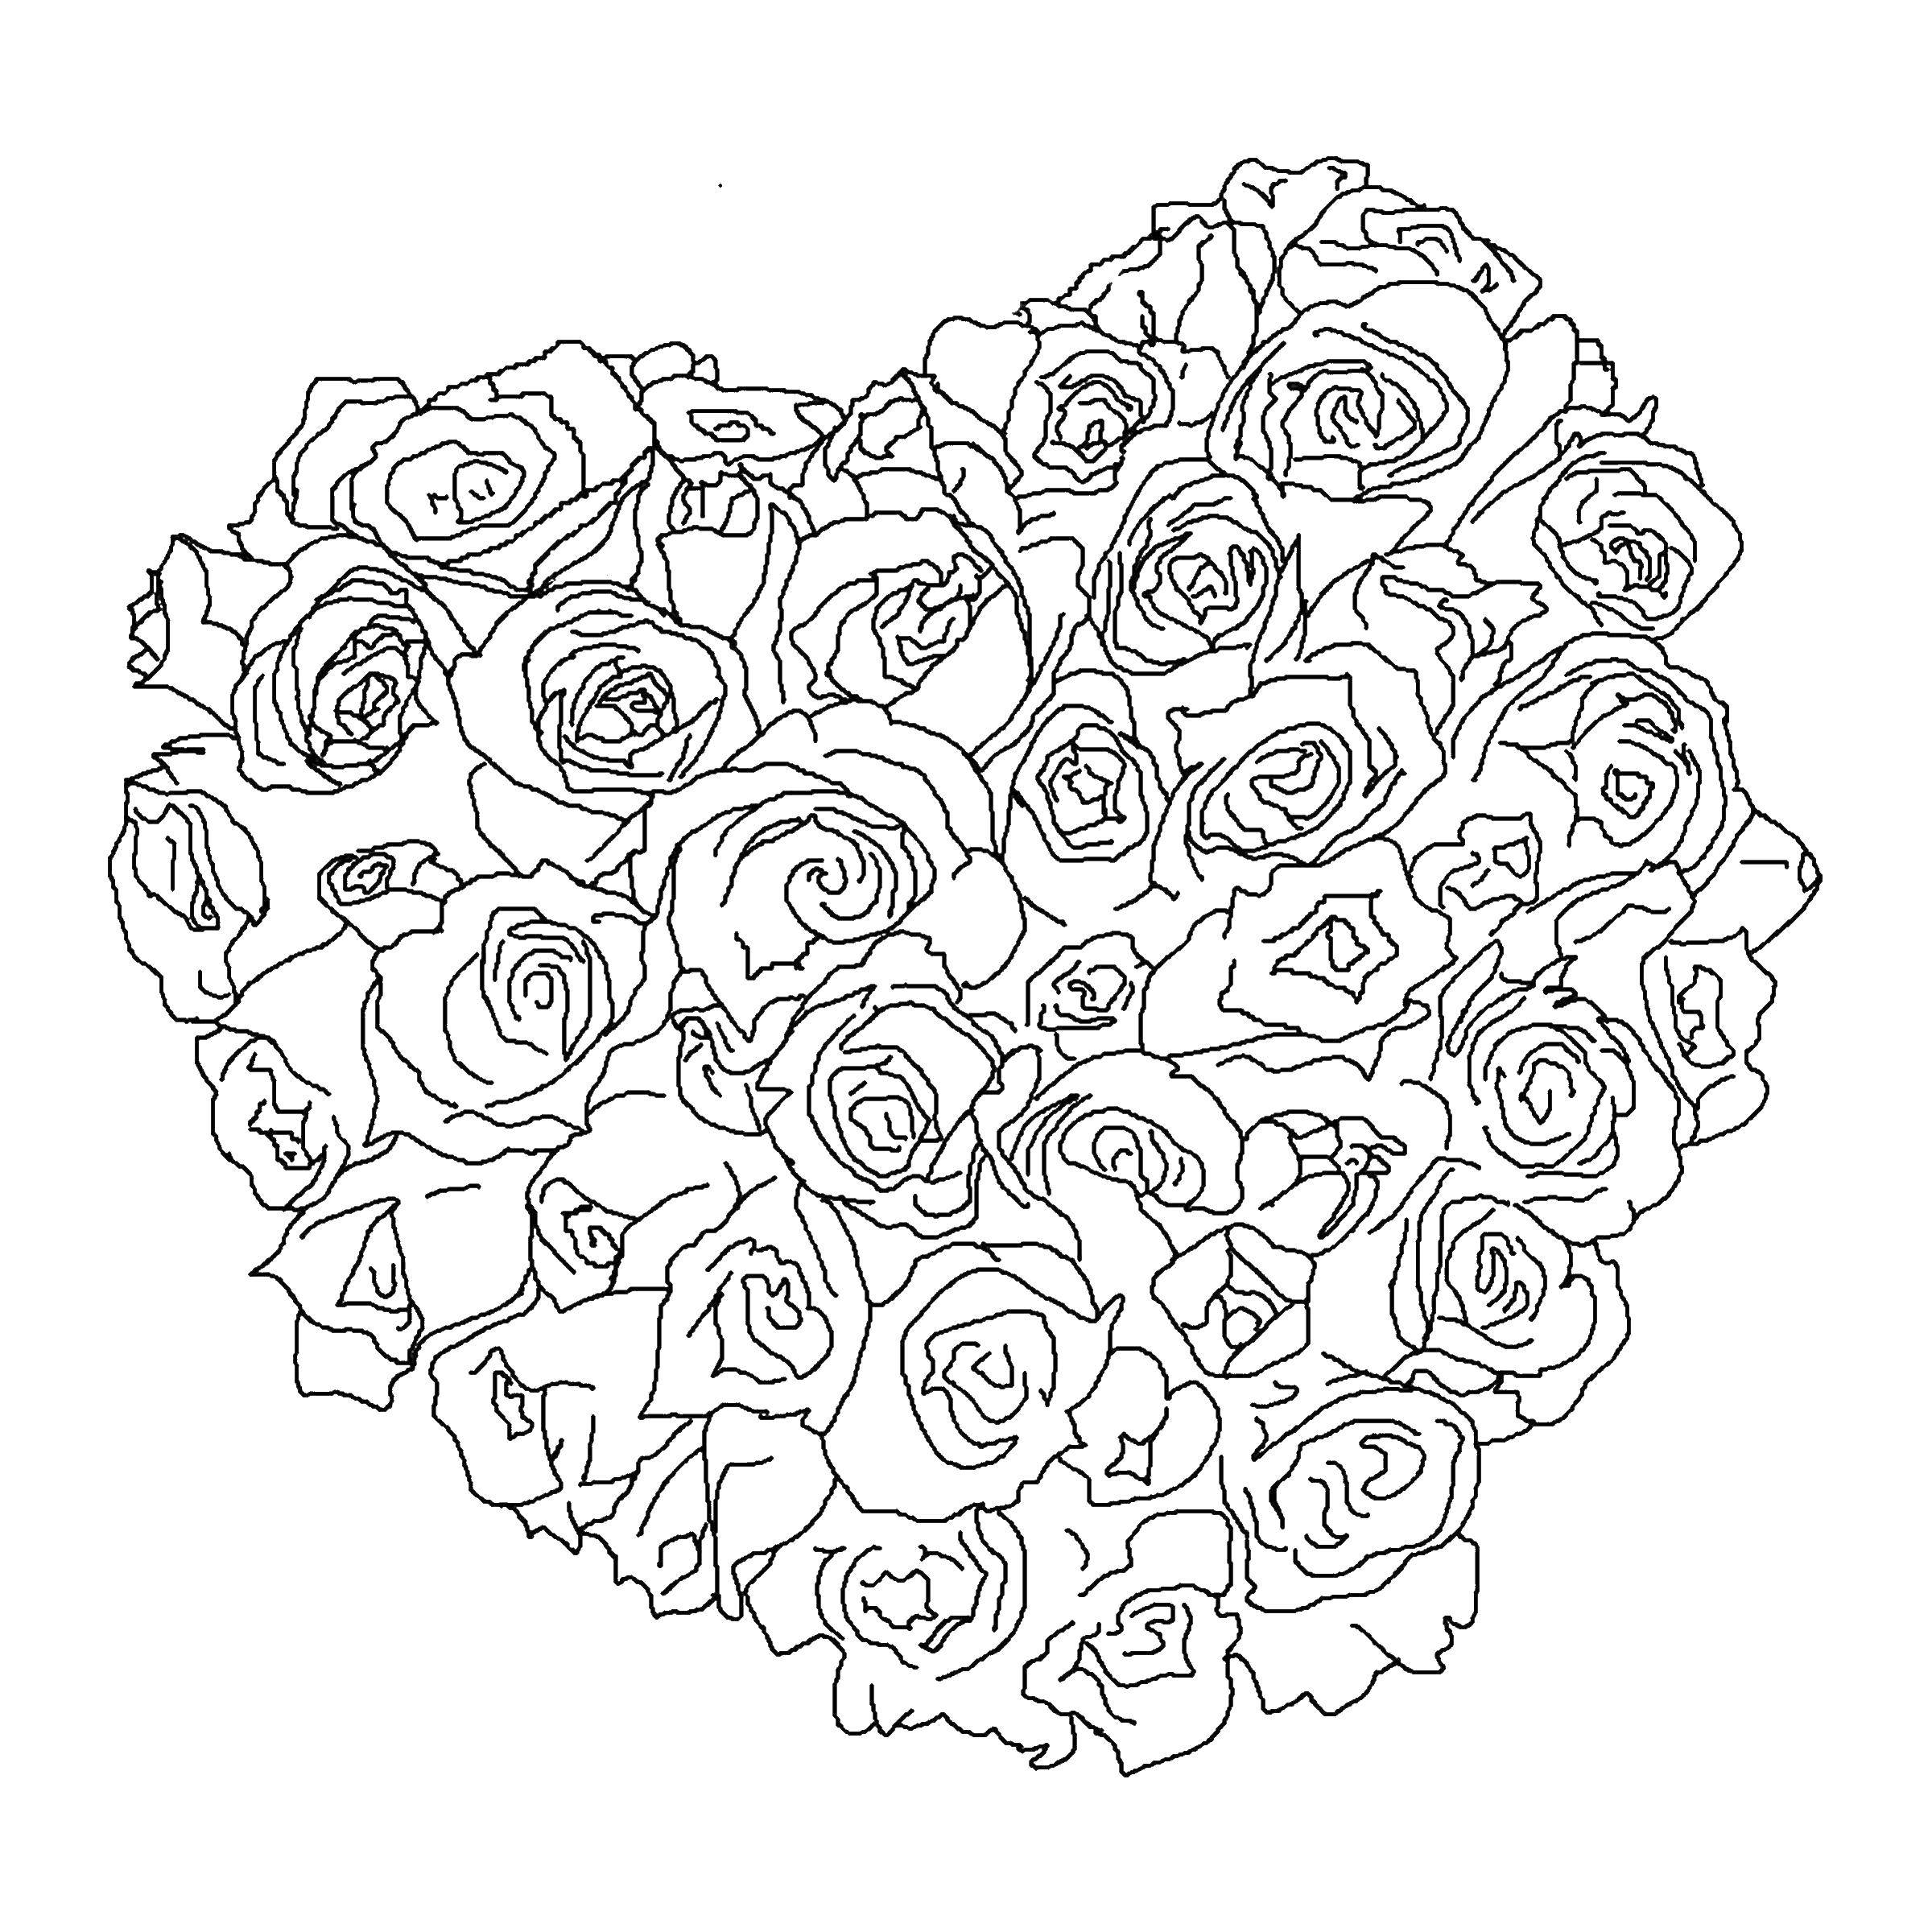 Coloring Floral heart. Category Valentines day. Tags:  Valentines day, love, heart, flowers.